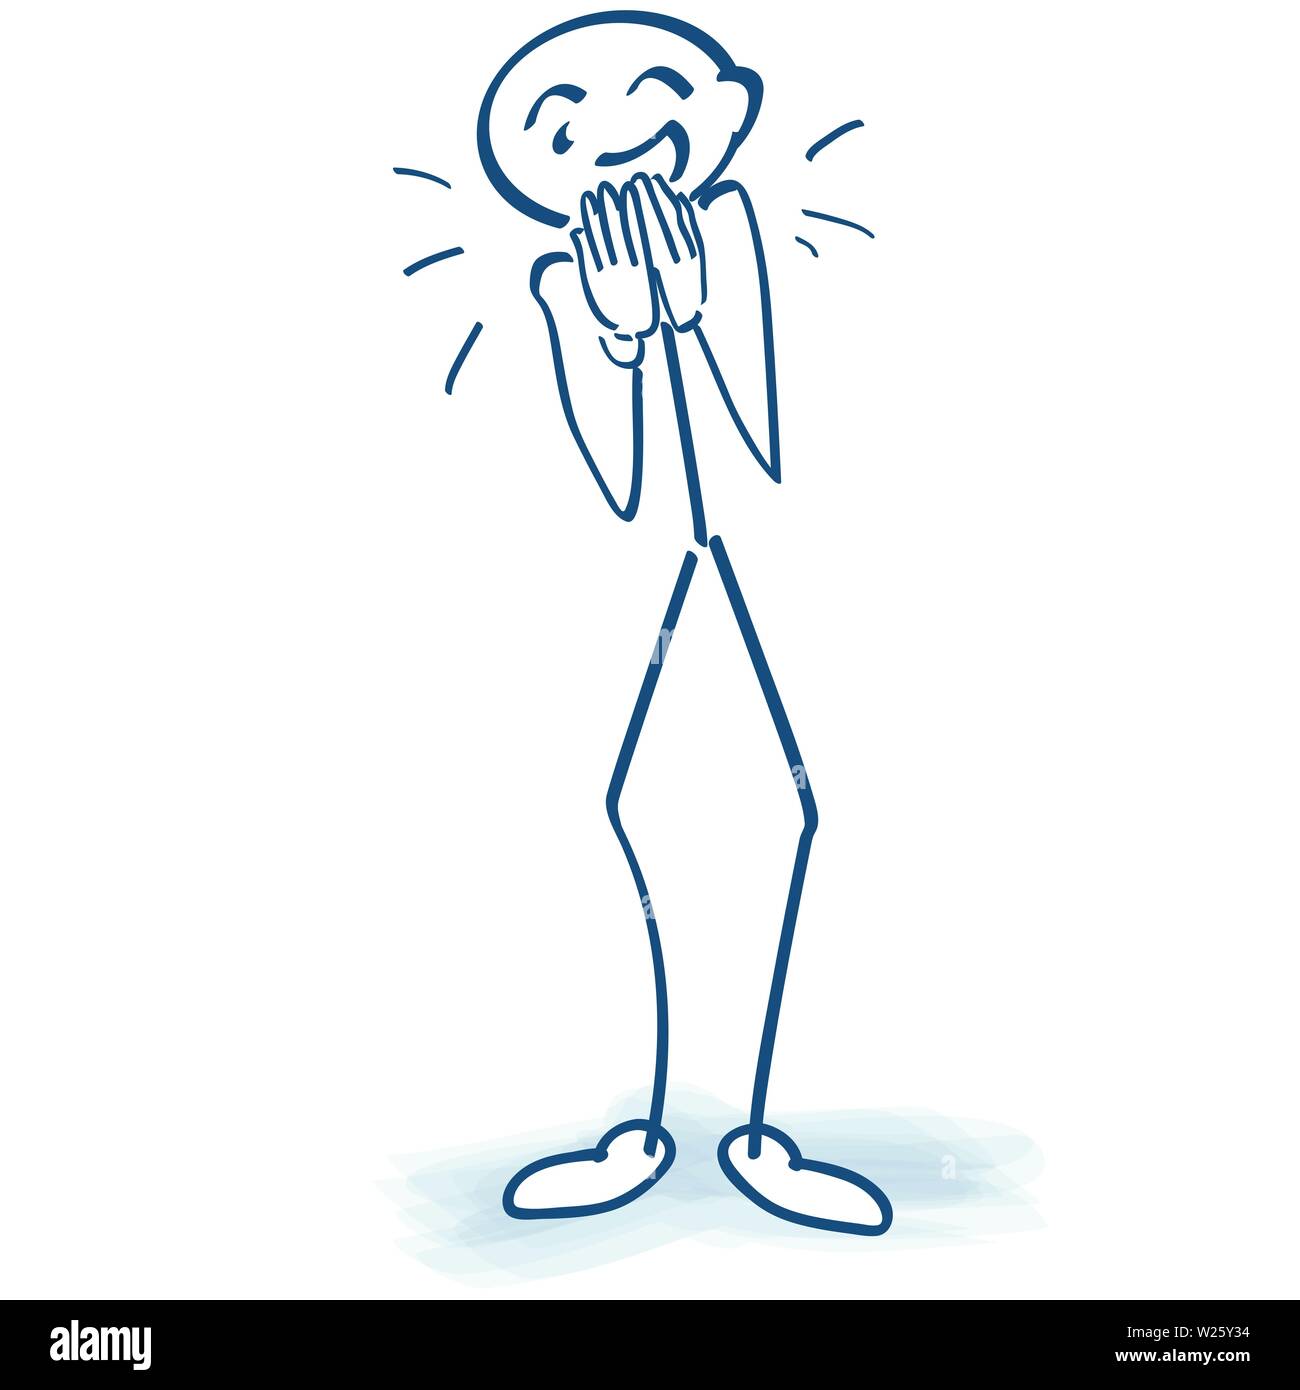 Stick figure with a wide laugh Stock Vector